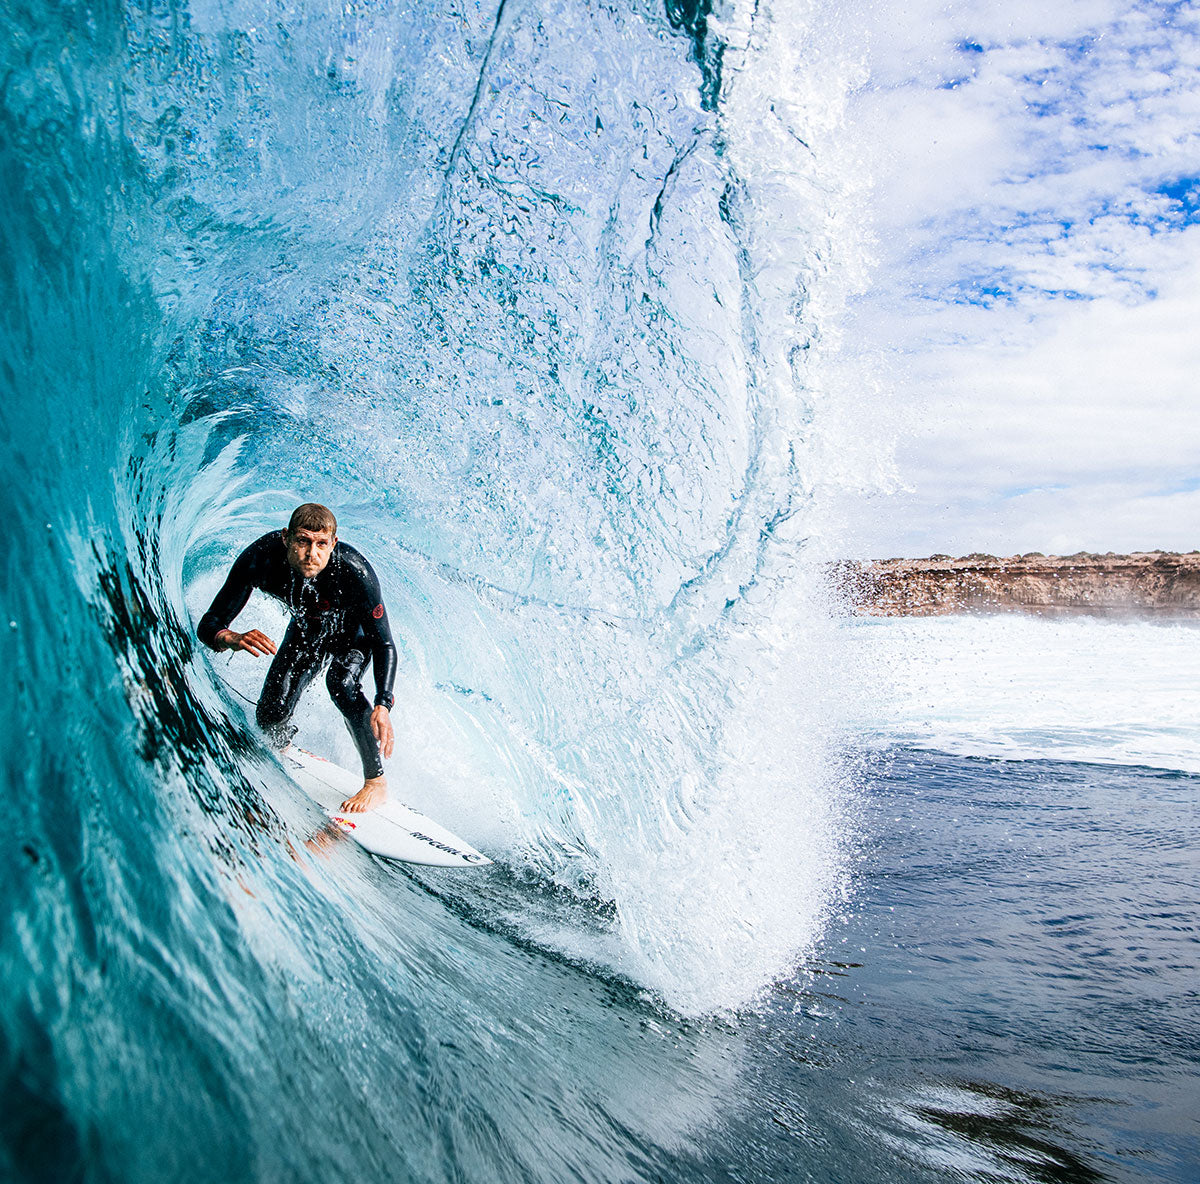 Mick Fanning wearing his top end Rip Curl Fusion wetsuit surfing inside a right hand barrel